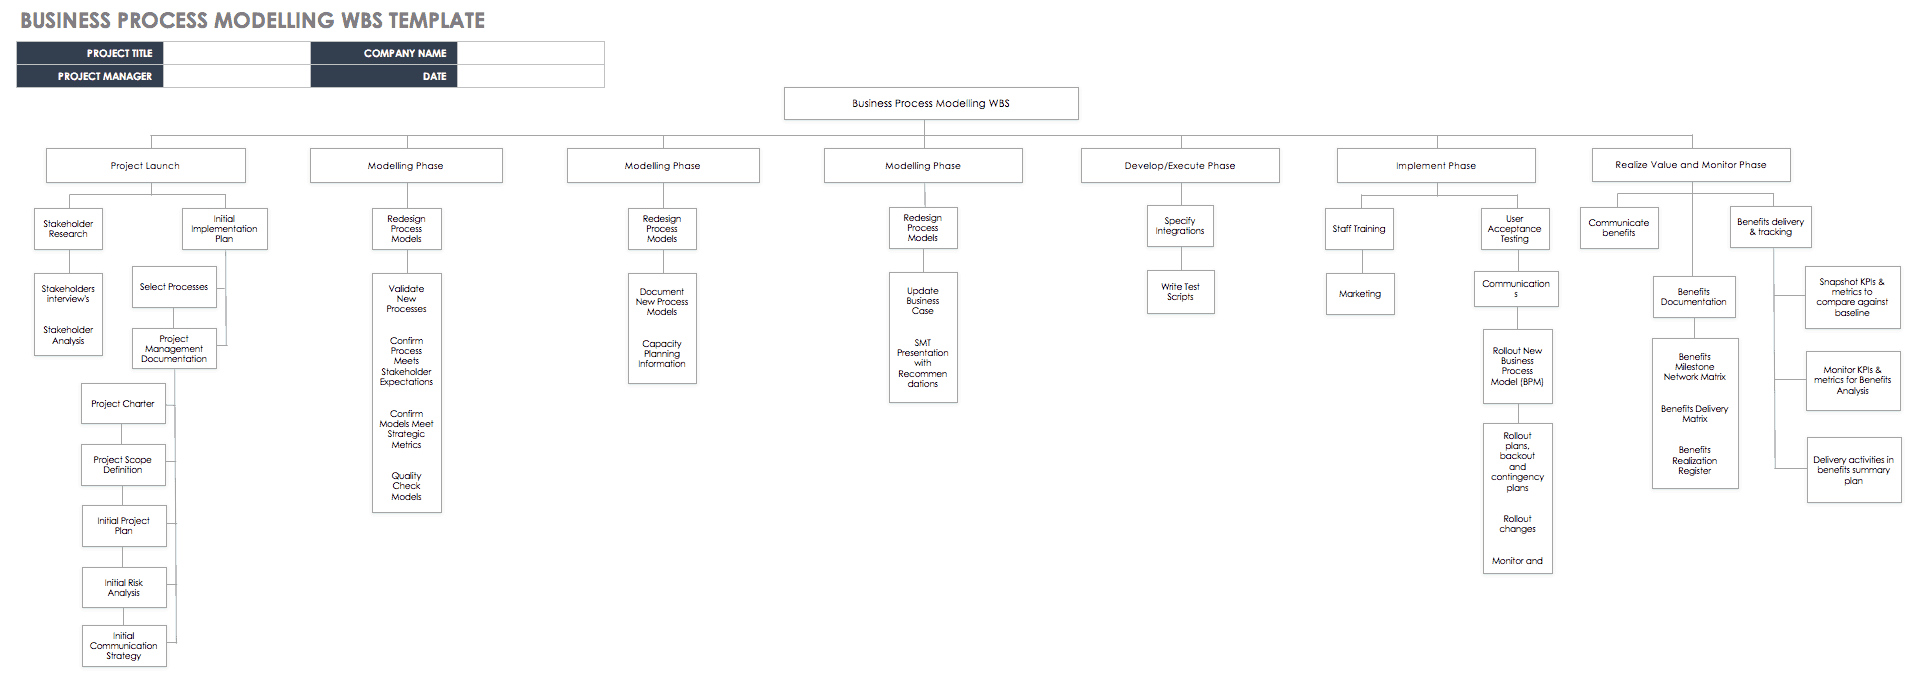 Business Process Modeling WBS Template